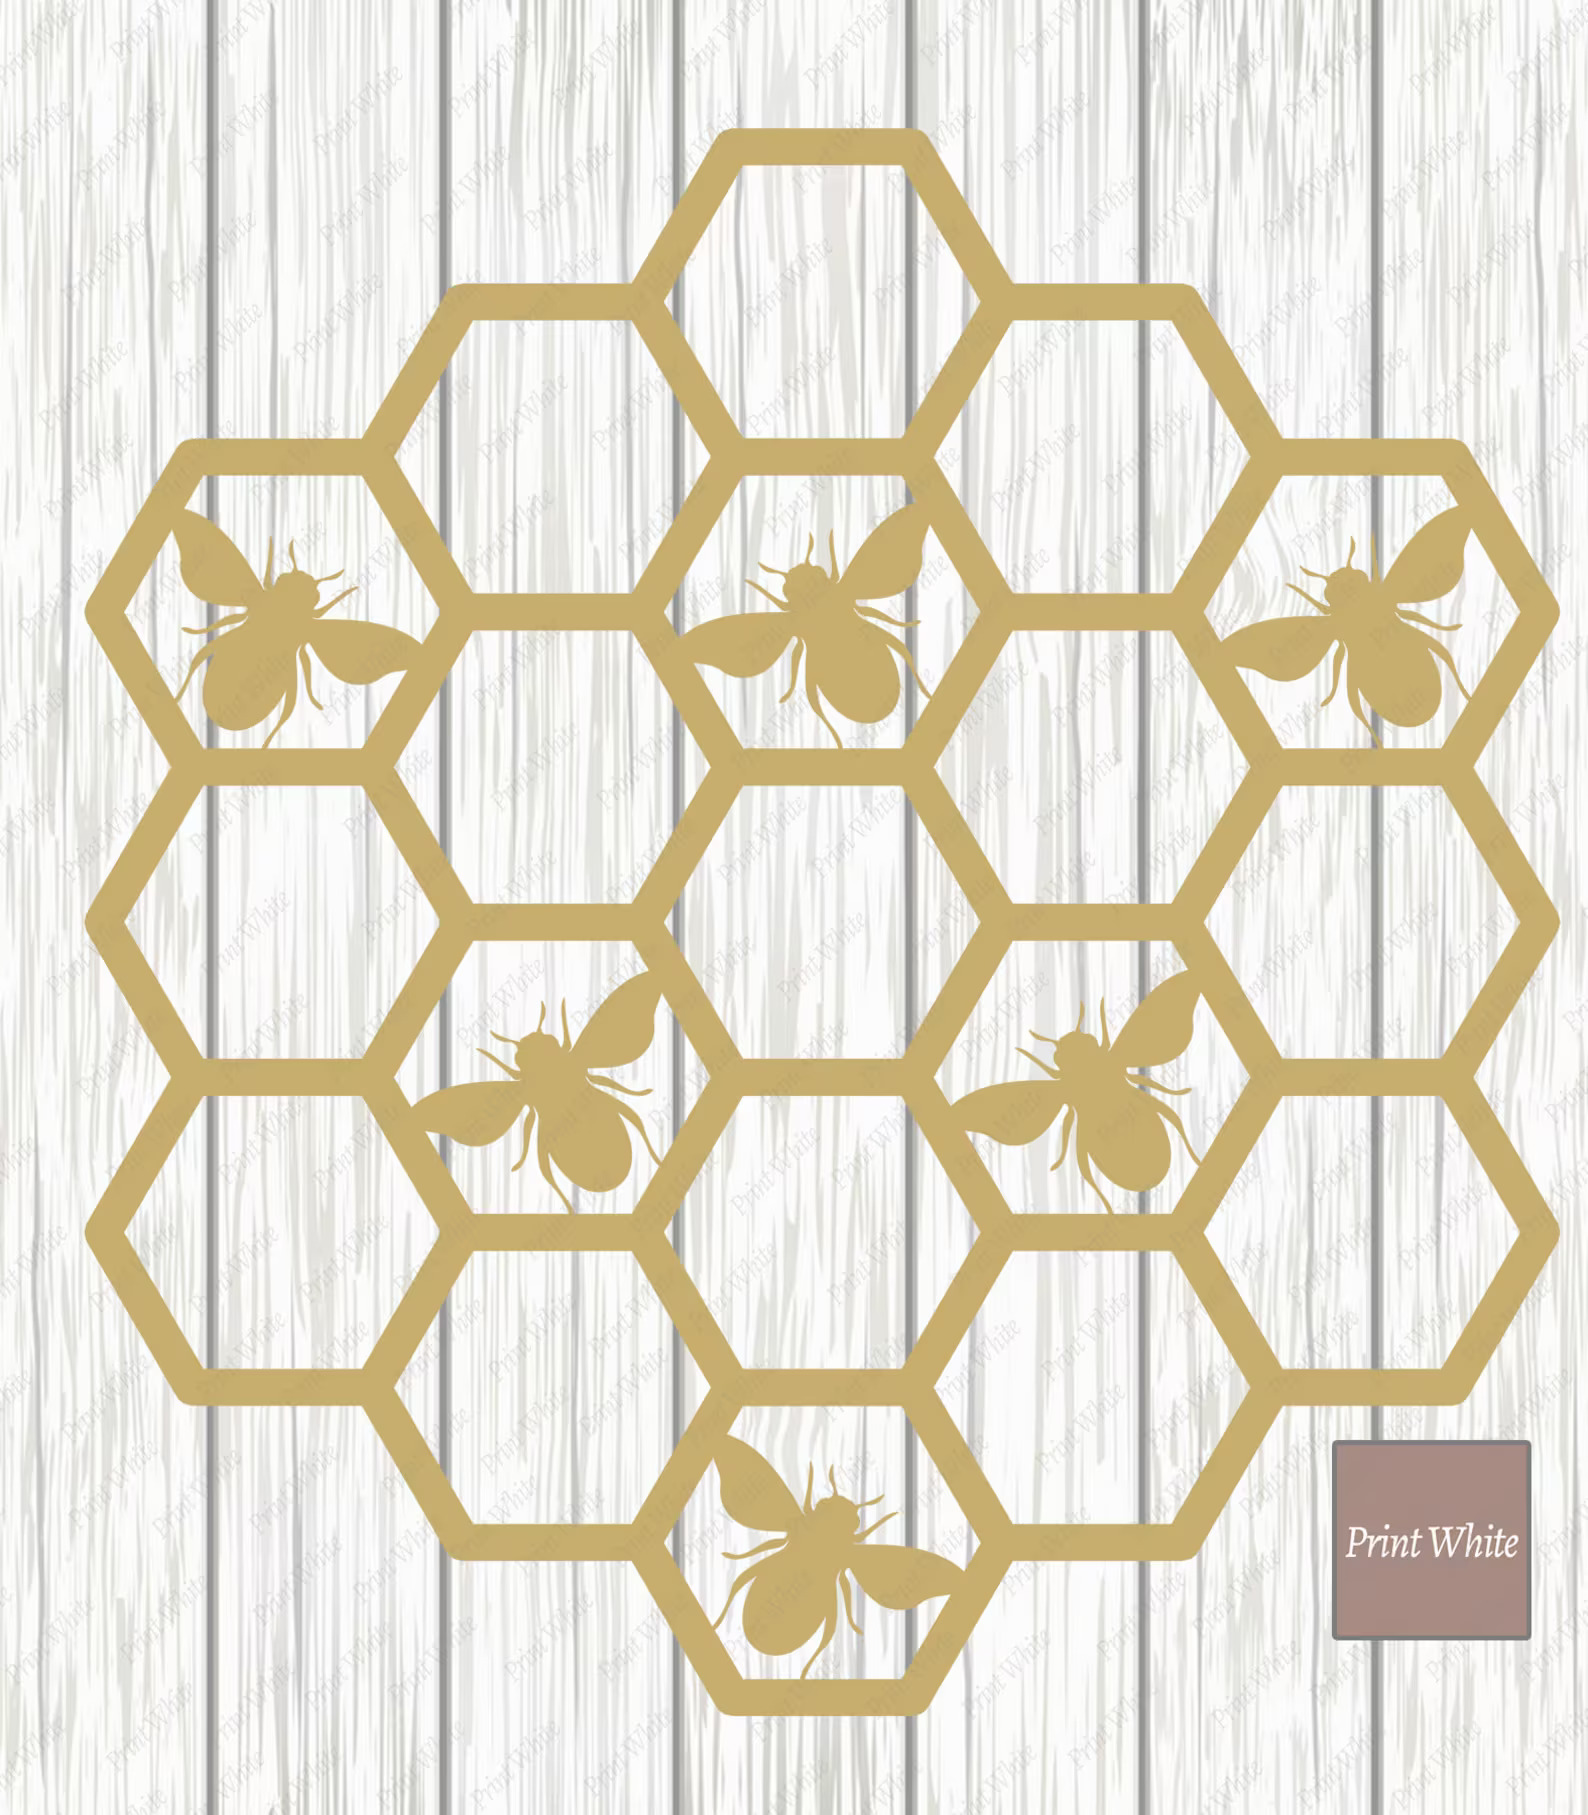 Honeycomb pattern with a bee on it.